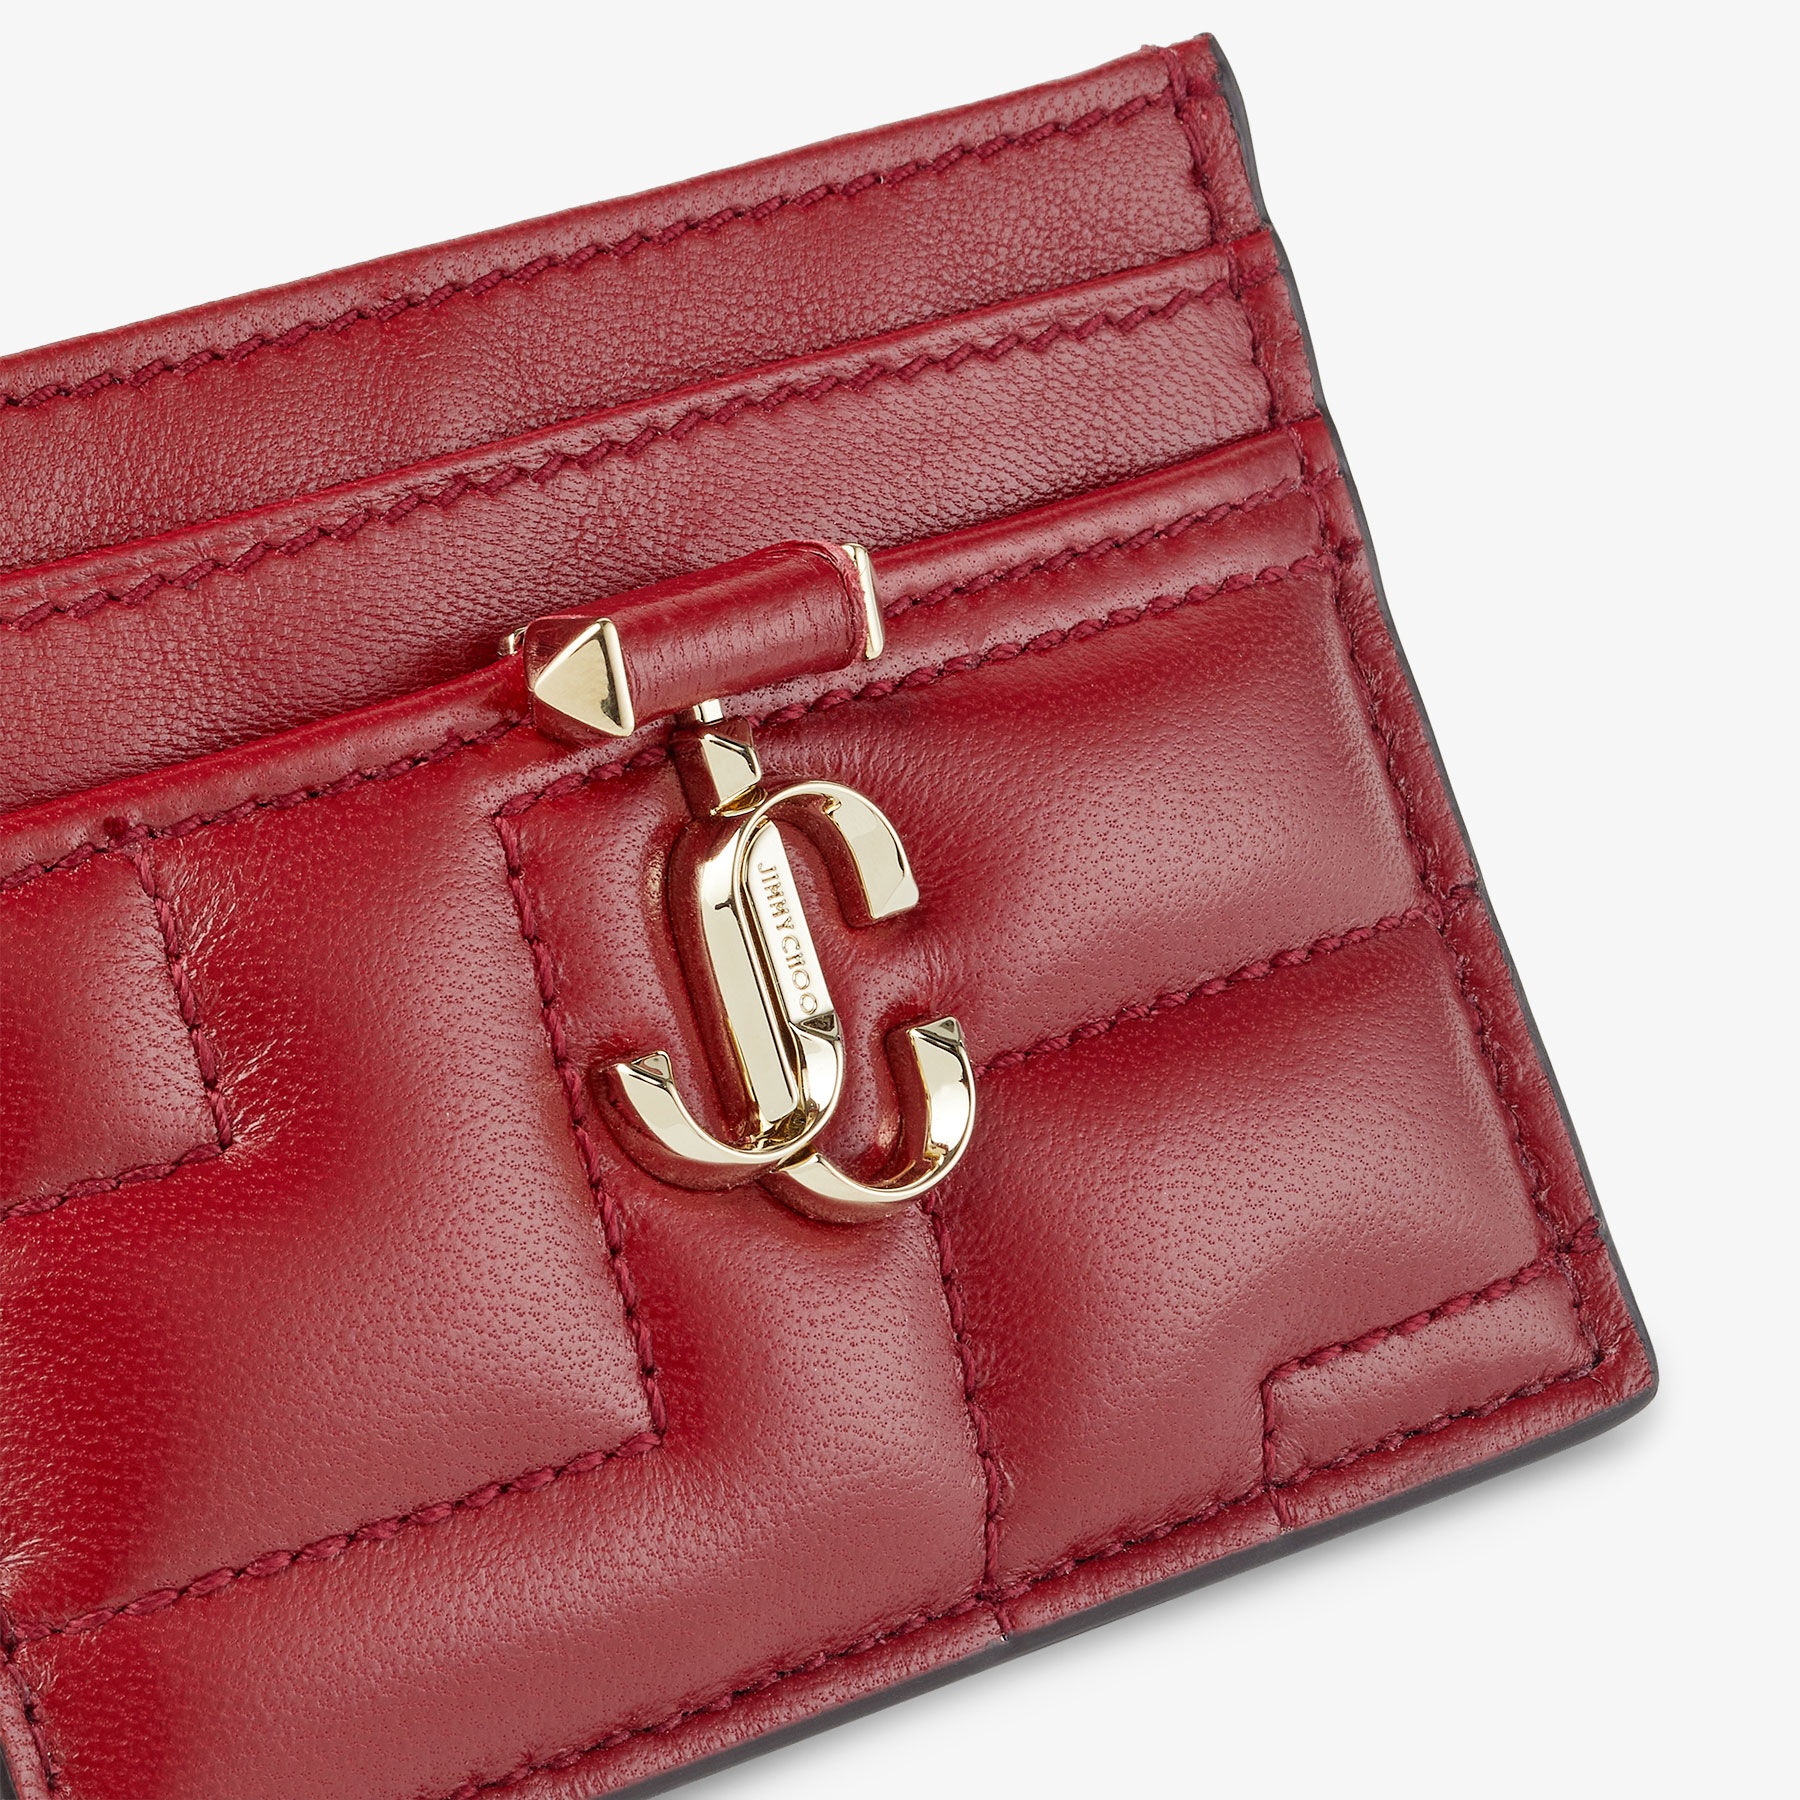 Umika
Cranberry Quilted Nappa Leather Card Holder with JC Emblem - 3